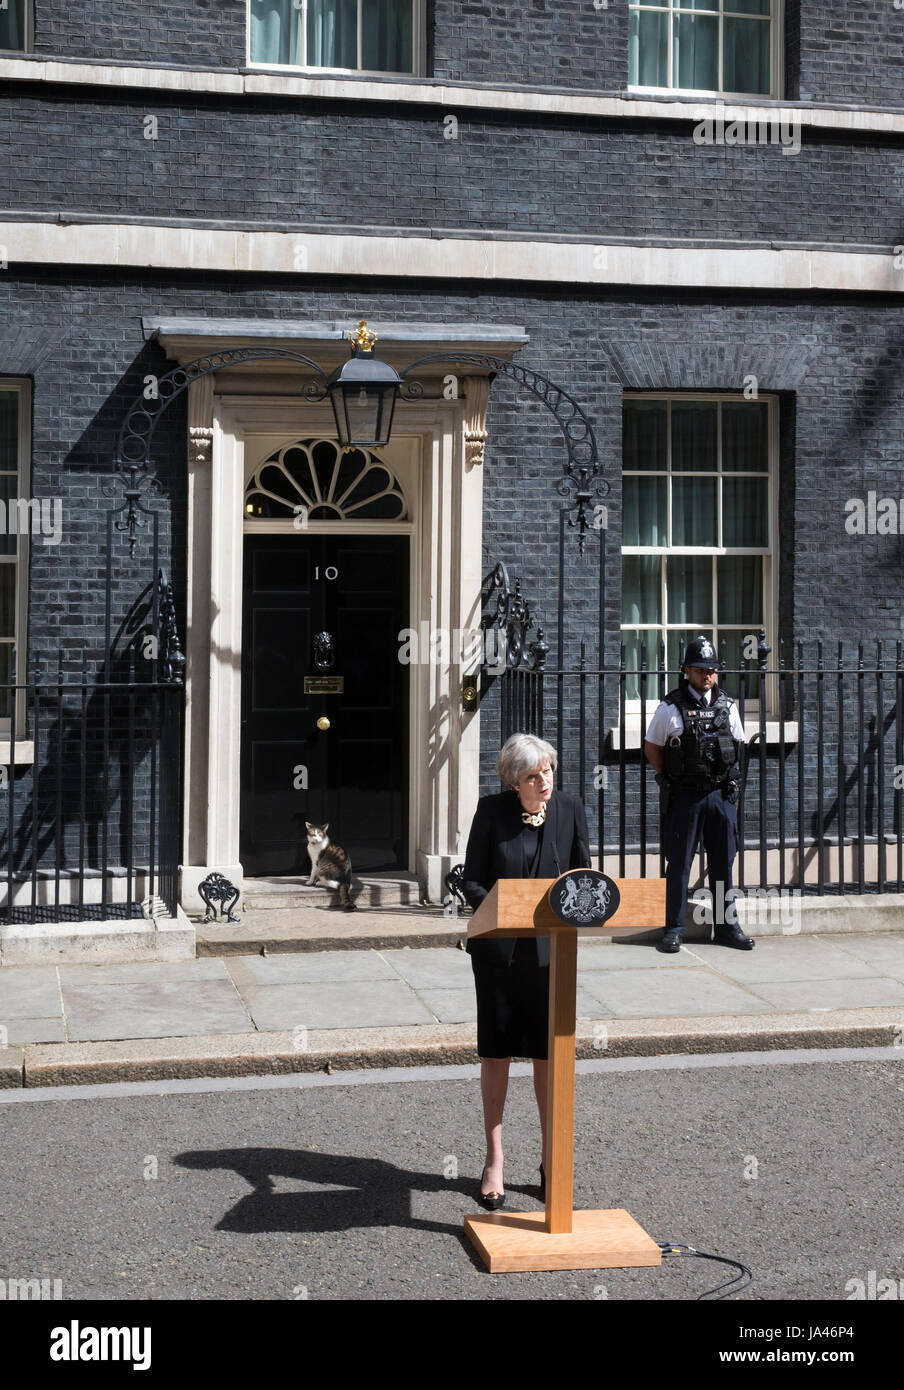 Prime Minister, Theresa May, makes a statement about security following the London June 3rd terror attack at London Bridge Stock Photo